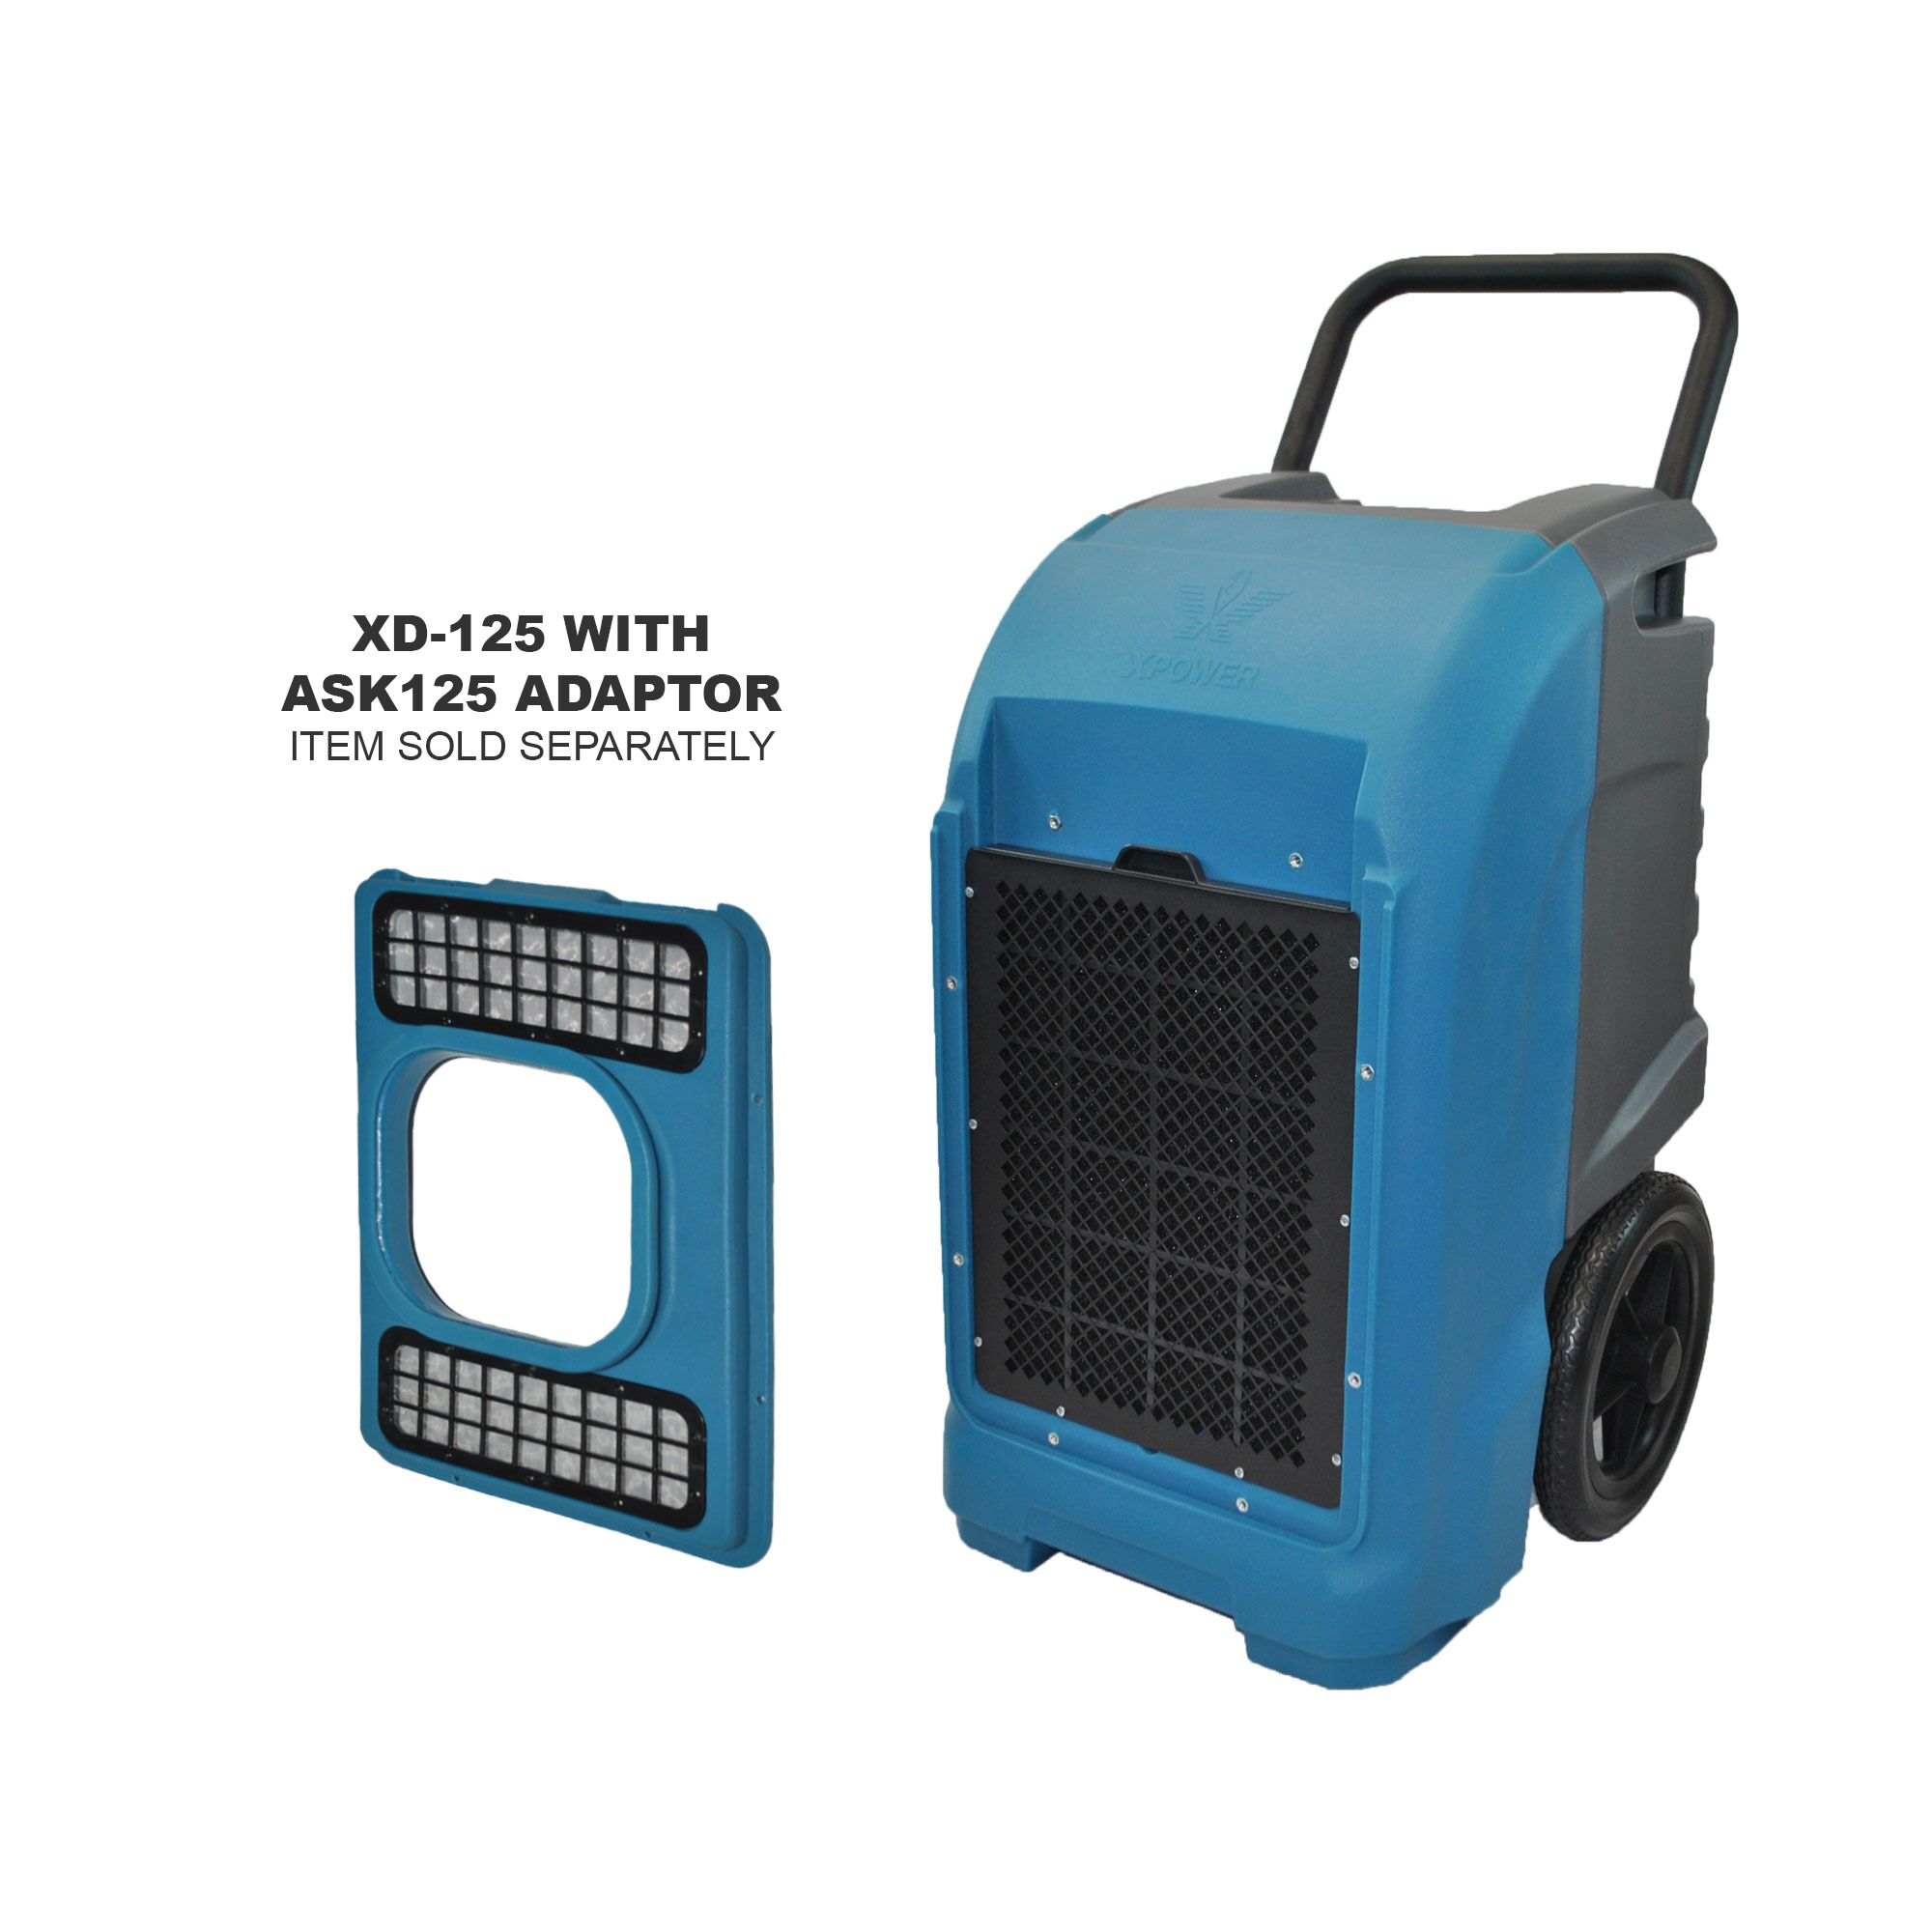 7 xd 125 commercial dehumidifier with ask125 adapter